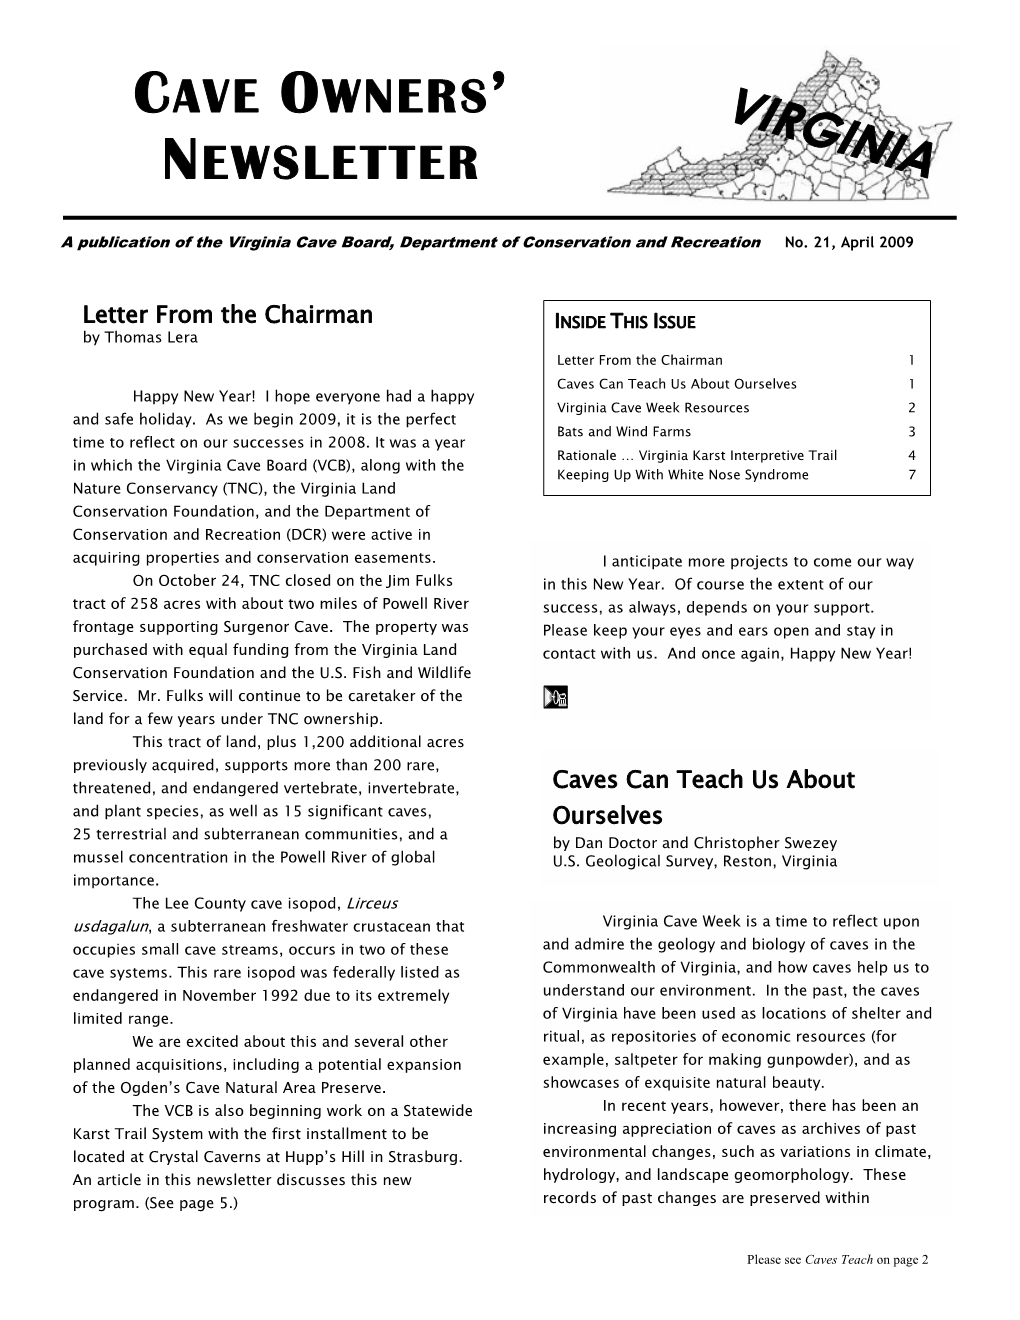 Cave Owners' Newsletter the Most Up-To-Date Information in a Timely Manner